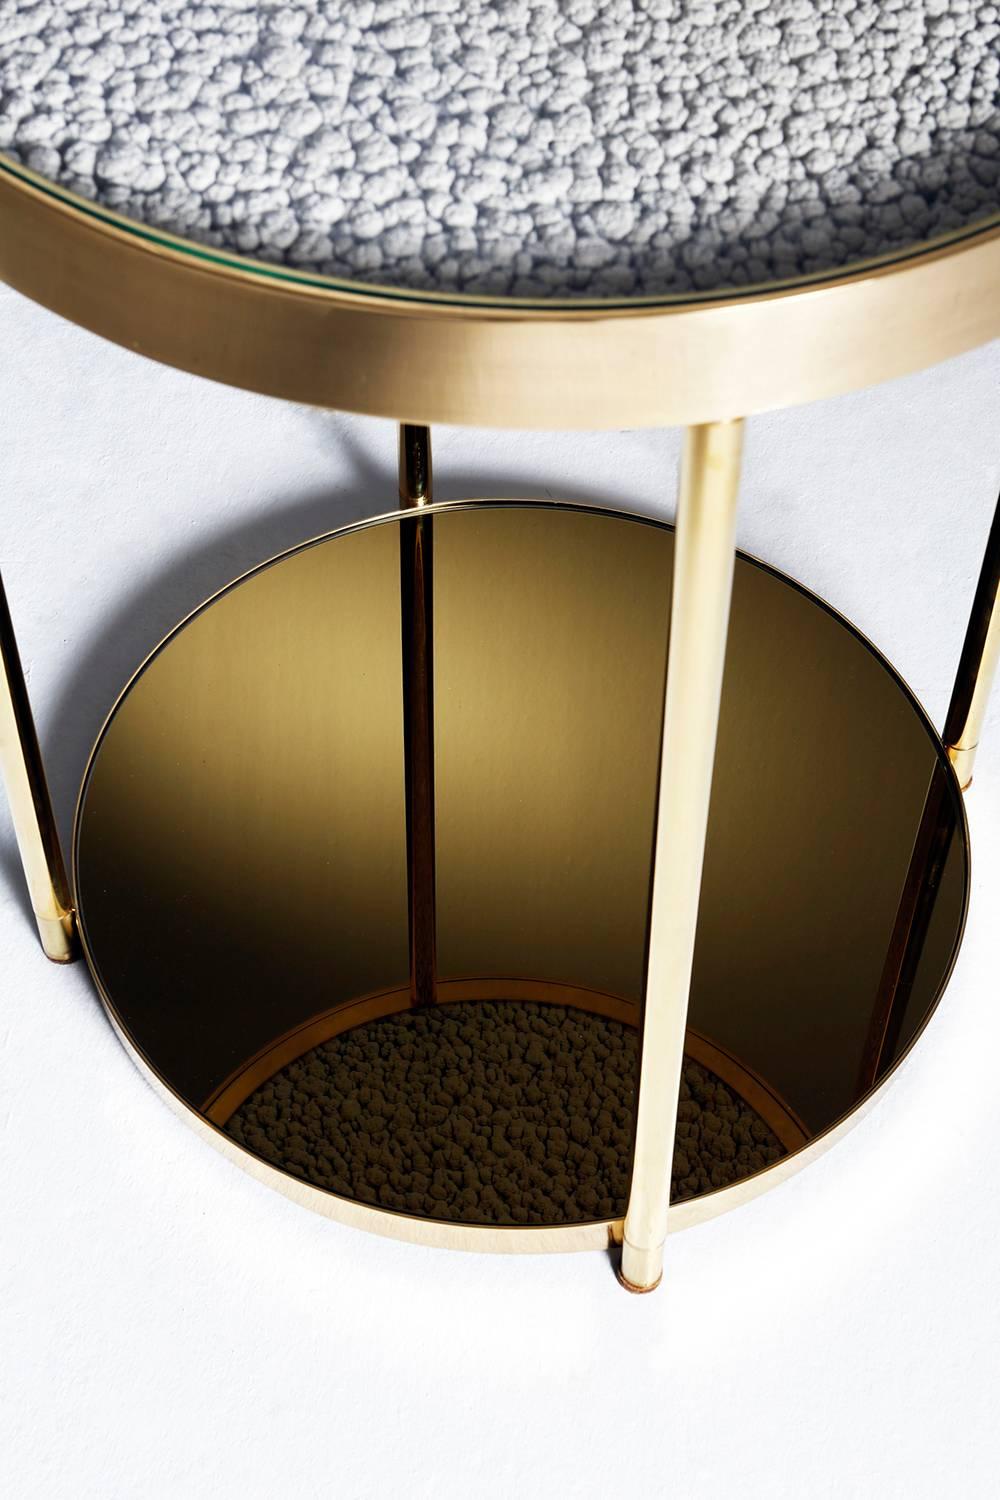 Turkish Contemporary Polished Brass Hemlock Side Table with Golden Mirror Base For Sale